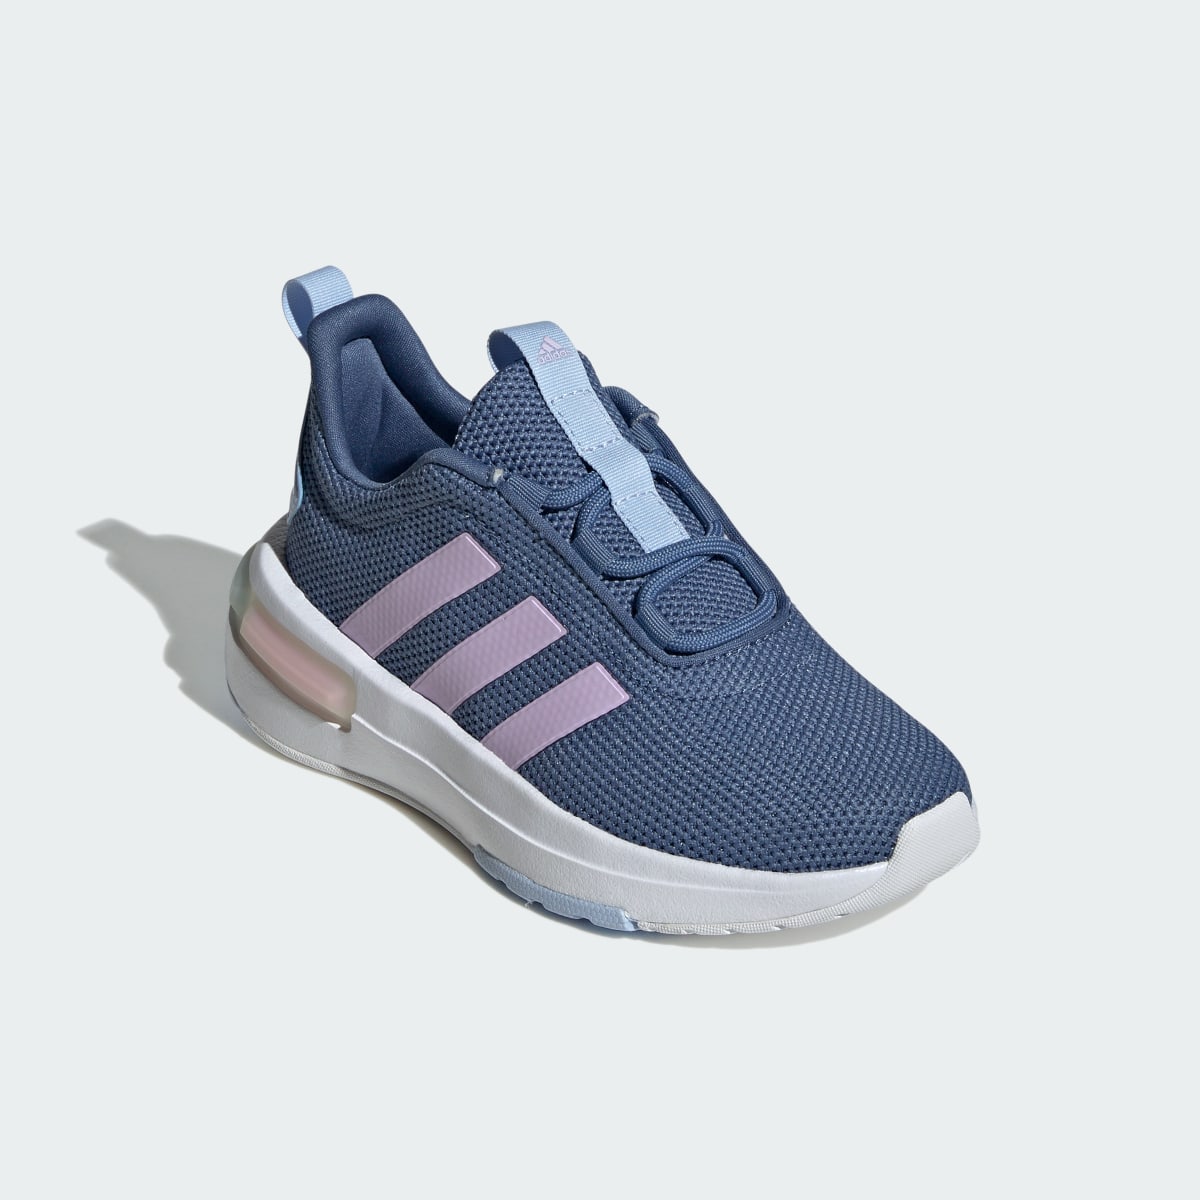 Adidas Racer TR23 Wide Shoes Kids. 5